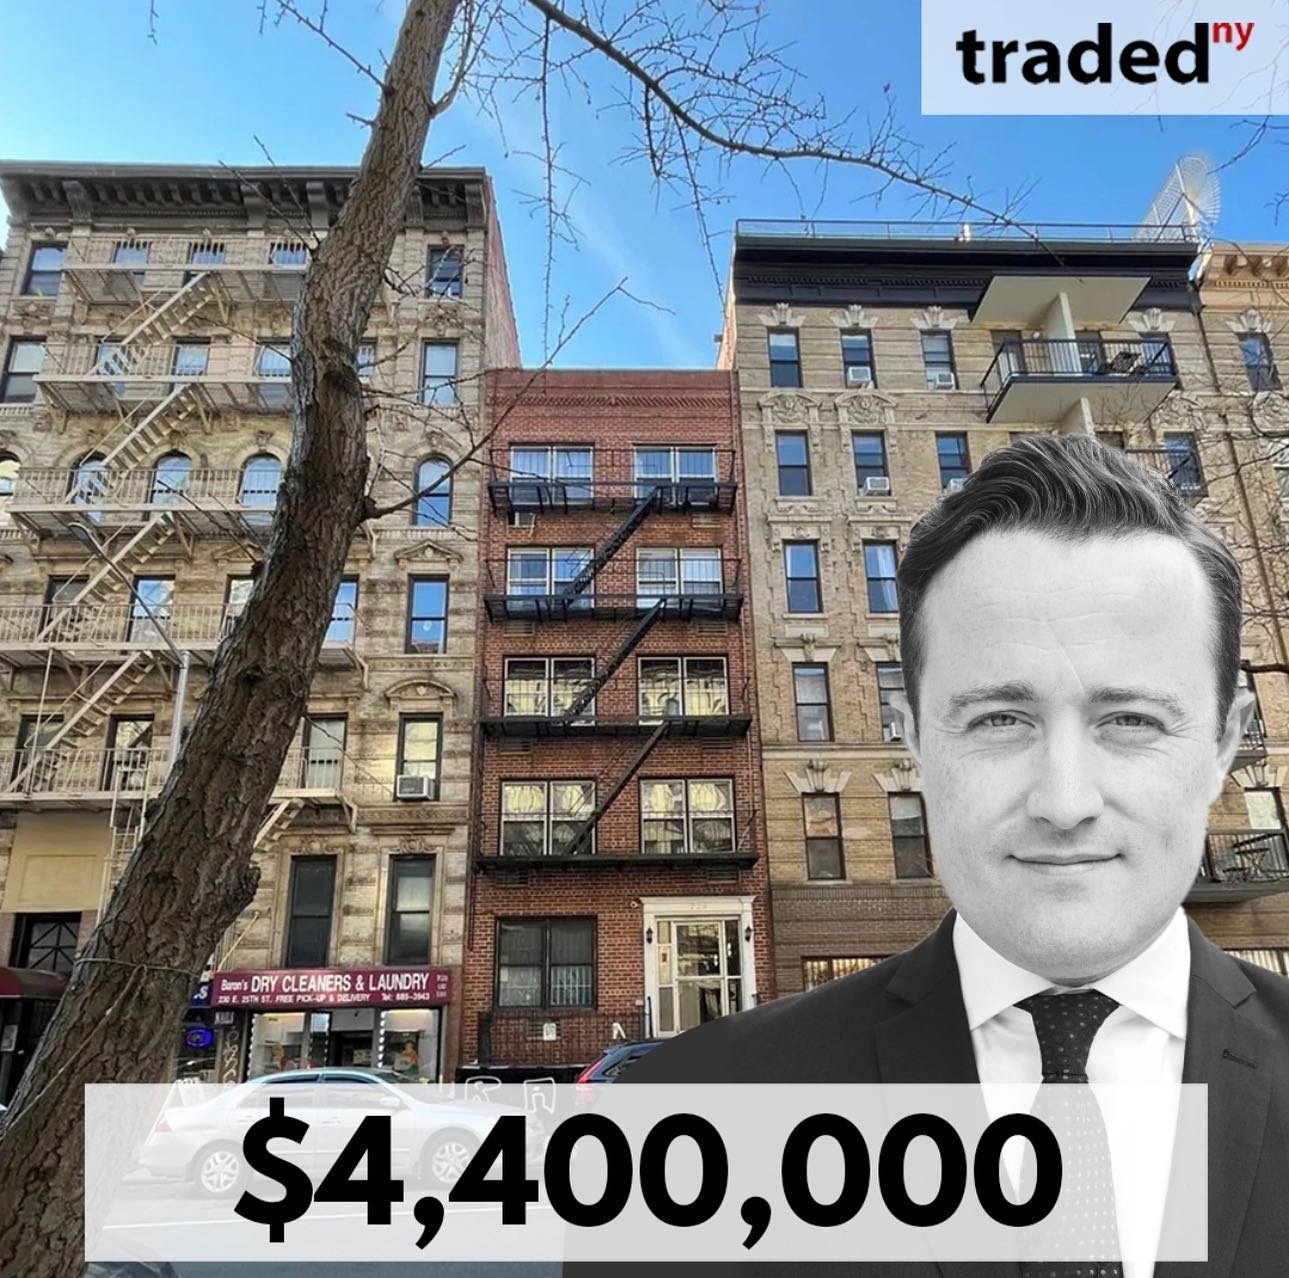 🚨 SOLD 🚨  IMAGE: Alan Stenson
DATE: 05/31/2023
ADDRESS: 228 East 25th Street
MARKET: New York
ASSET TYPE: Multifamily
BROKERS: Alan Stenson (@Alan__Stenson) - Brax Realty (@BraxRealtyNYC)
SALE PRICE: $4,400,000
UNITS: 12 ~ PPU: $366,667
SF: 8,160 ~